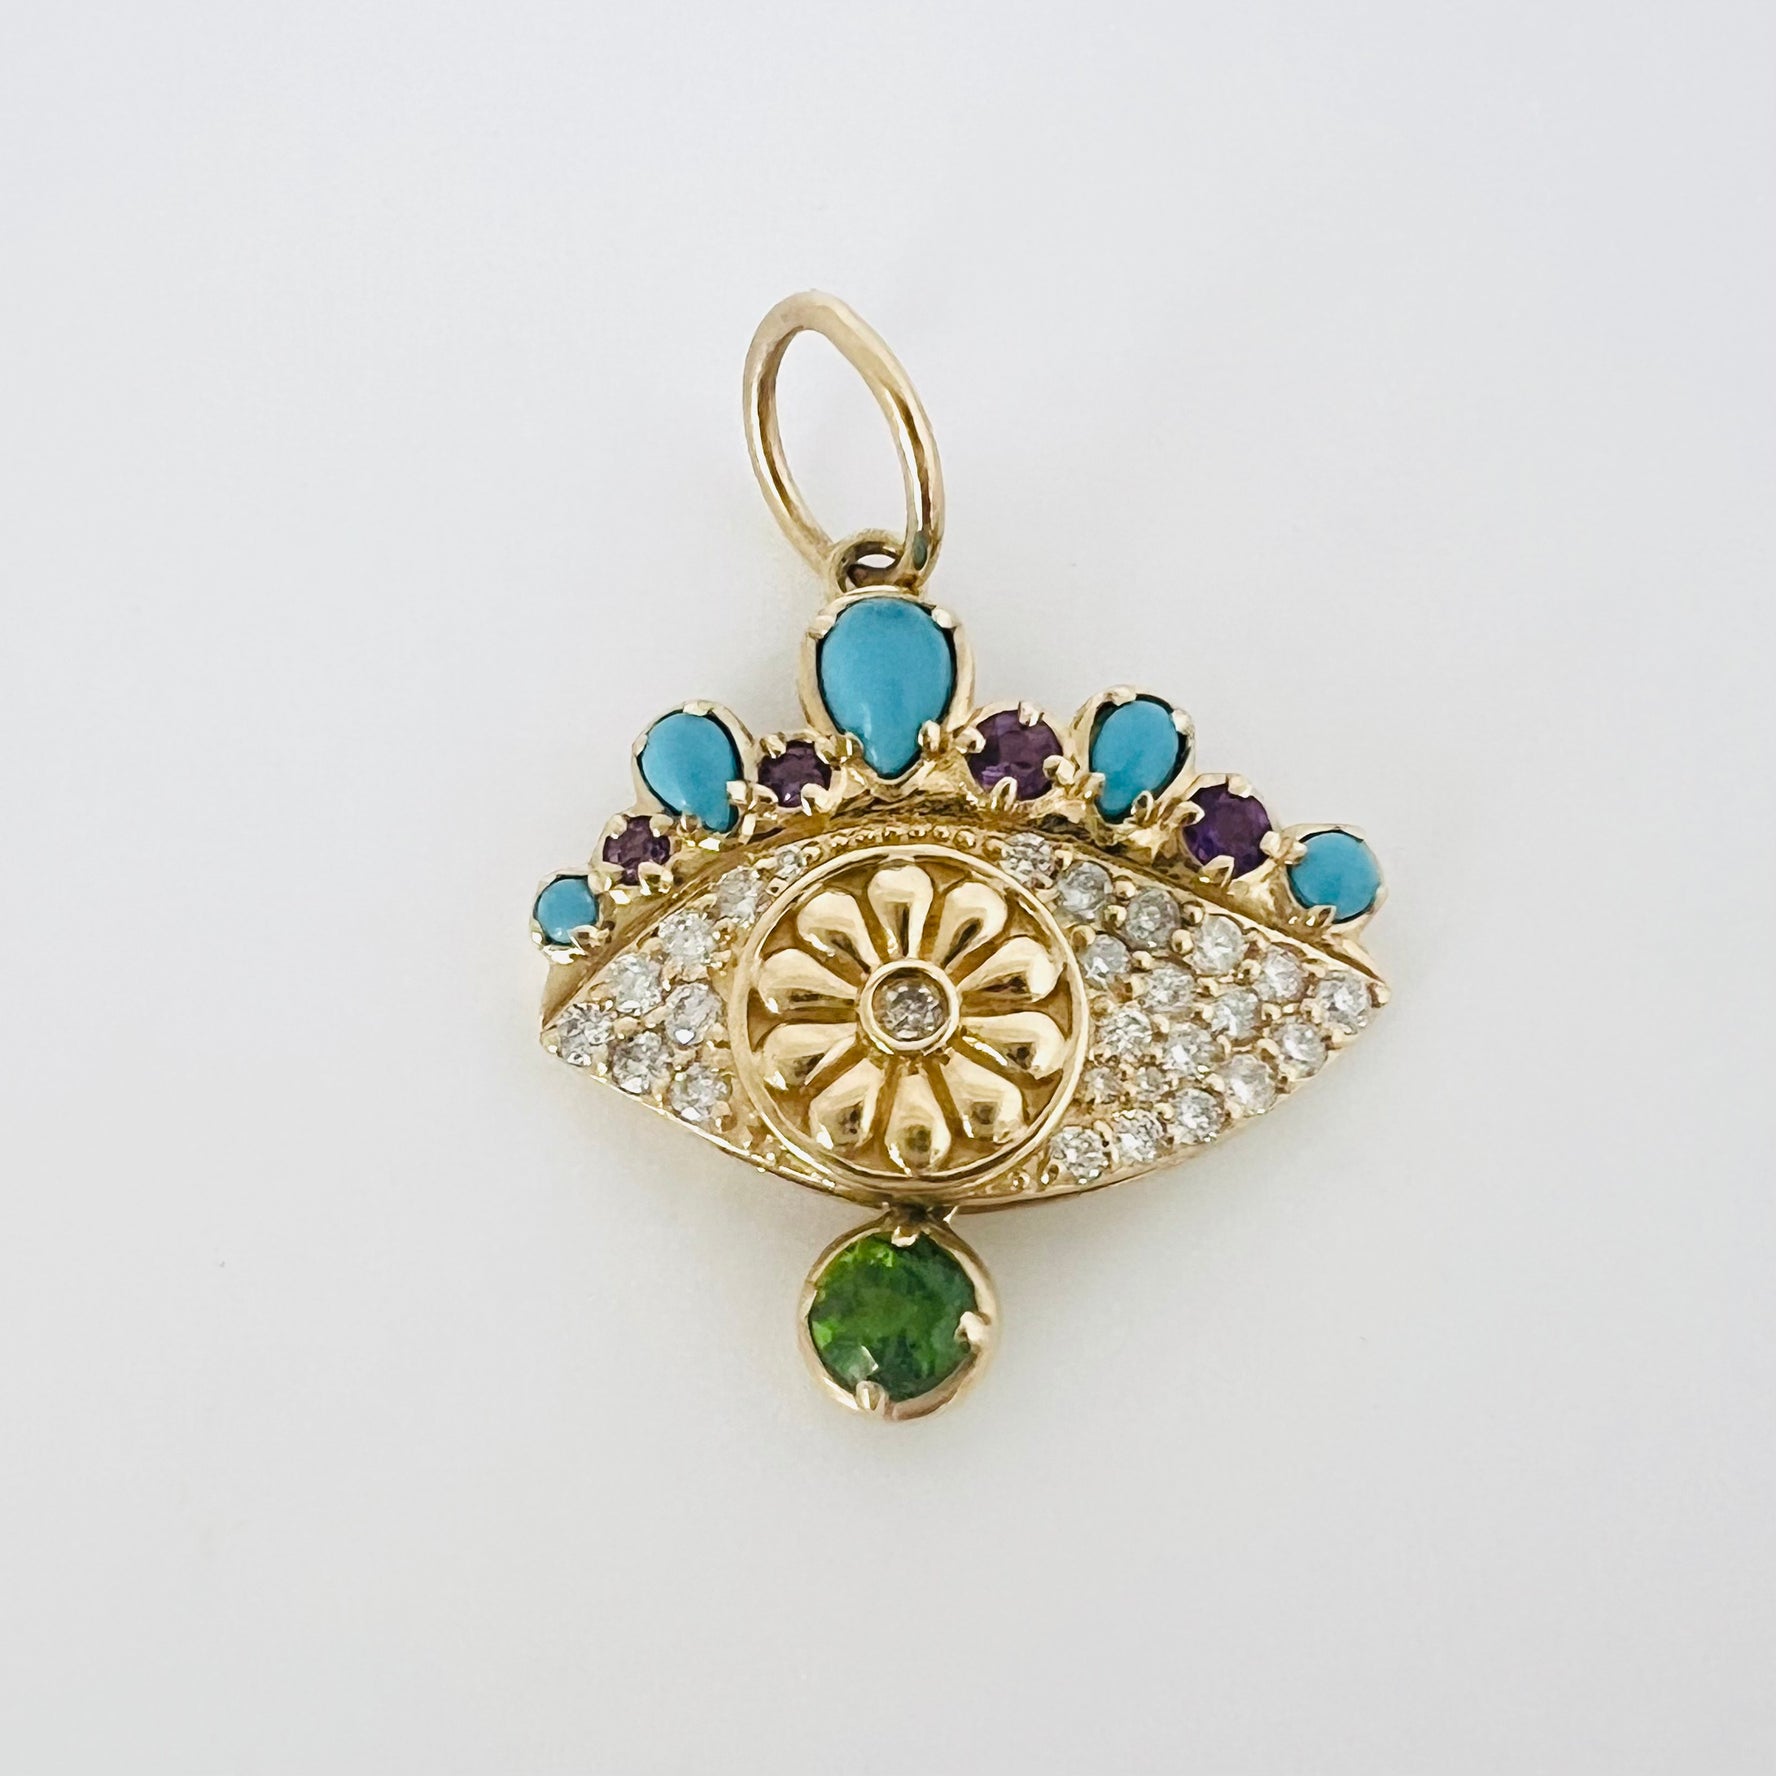 14 k gold with diamond, emerald, amethyst and turquoise evil eye pendant